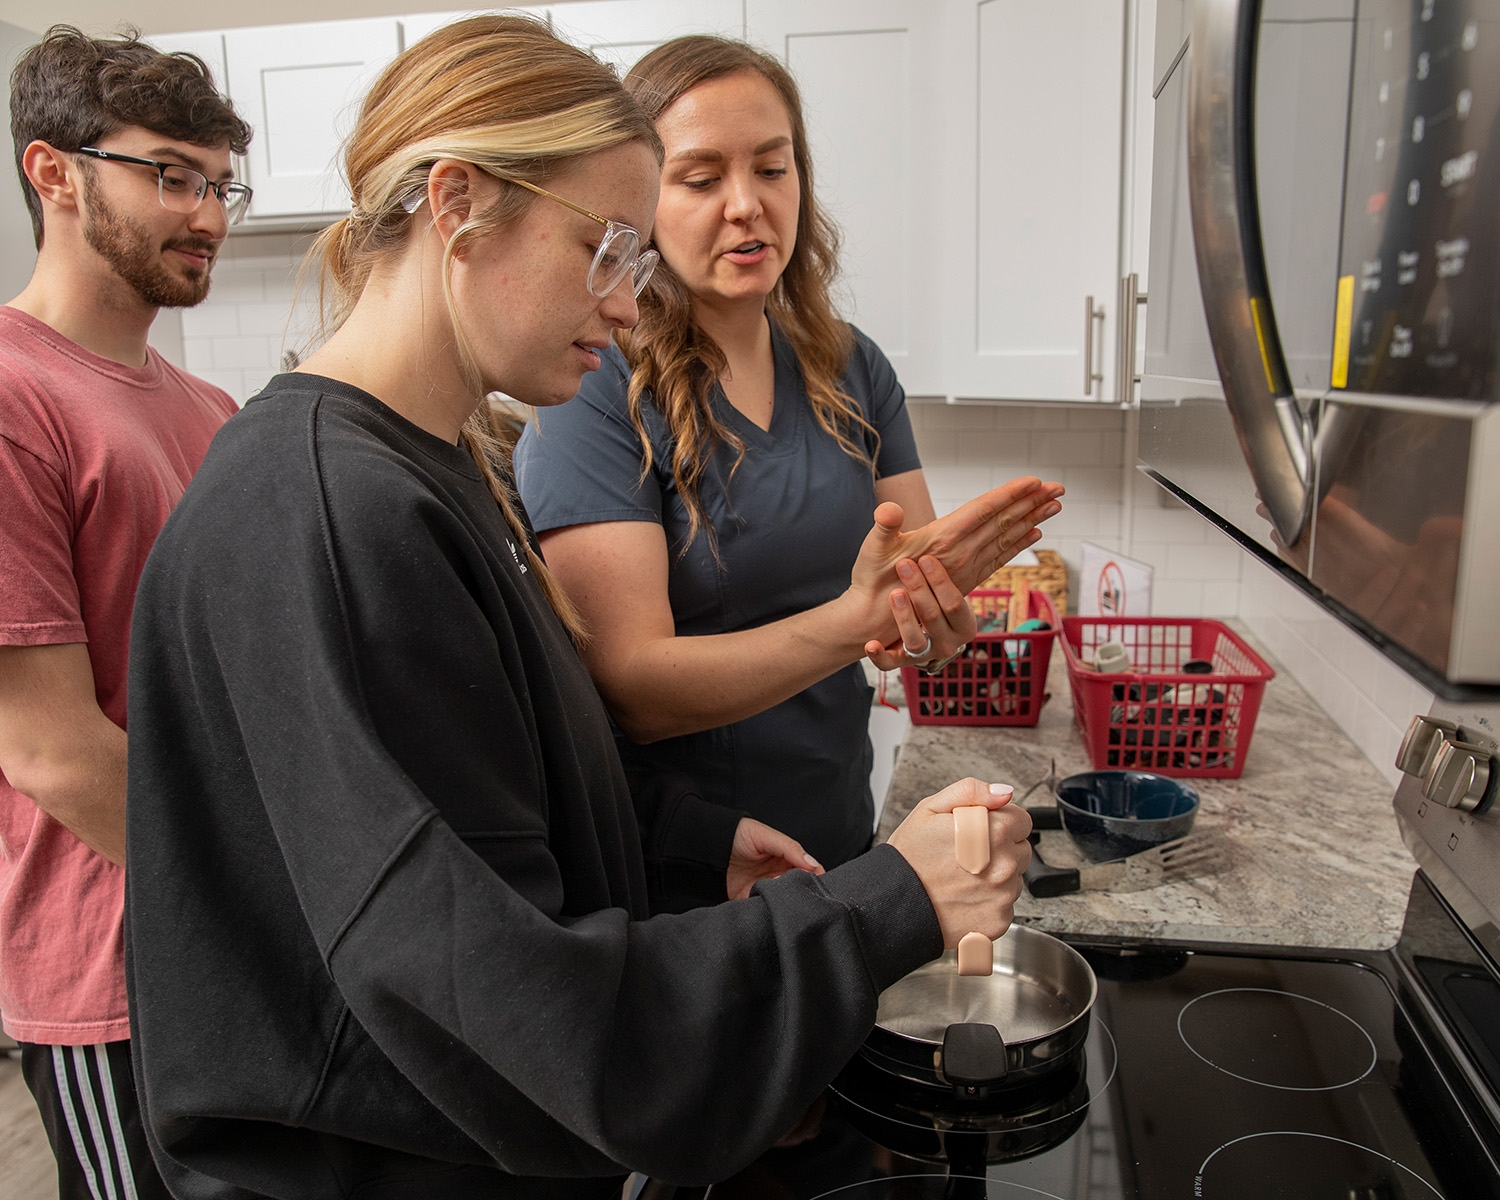 An OT instructor explains the correct useage and benefit of an adaptive kitchen implement.